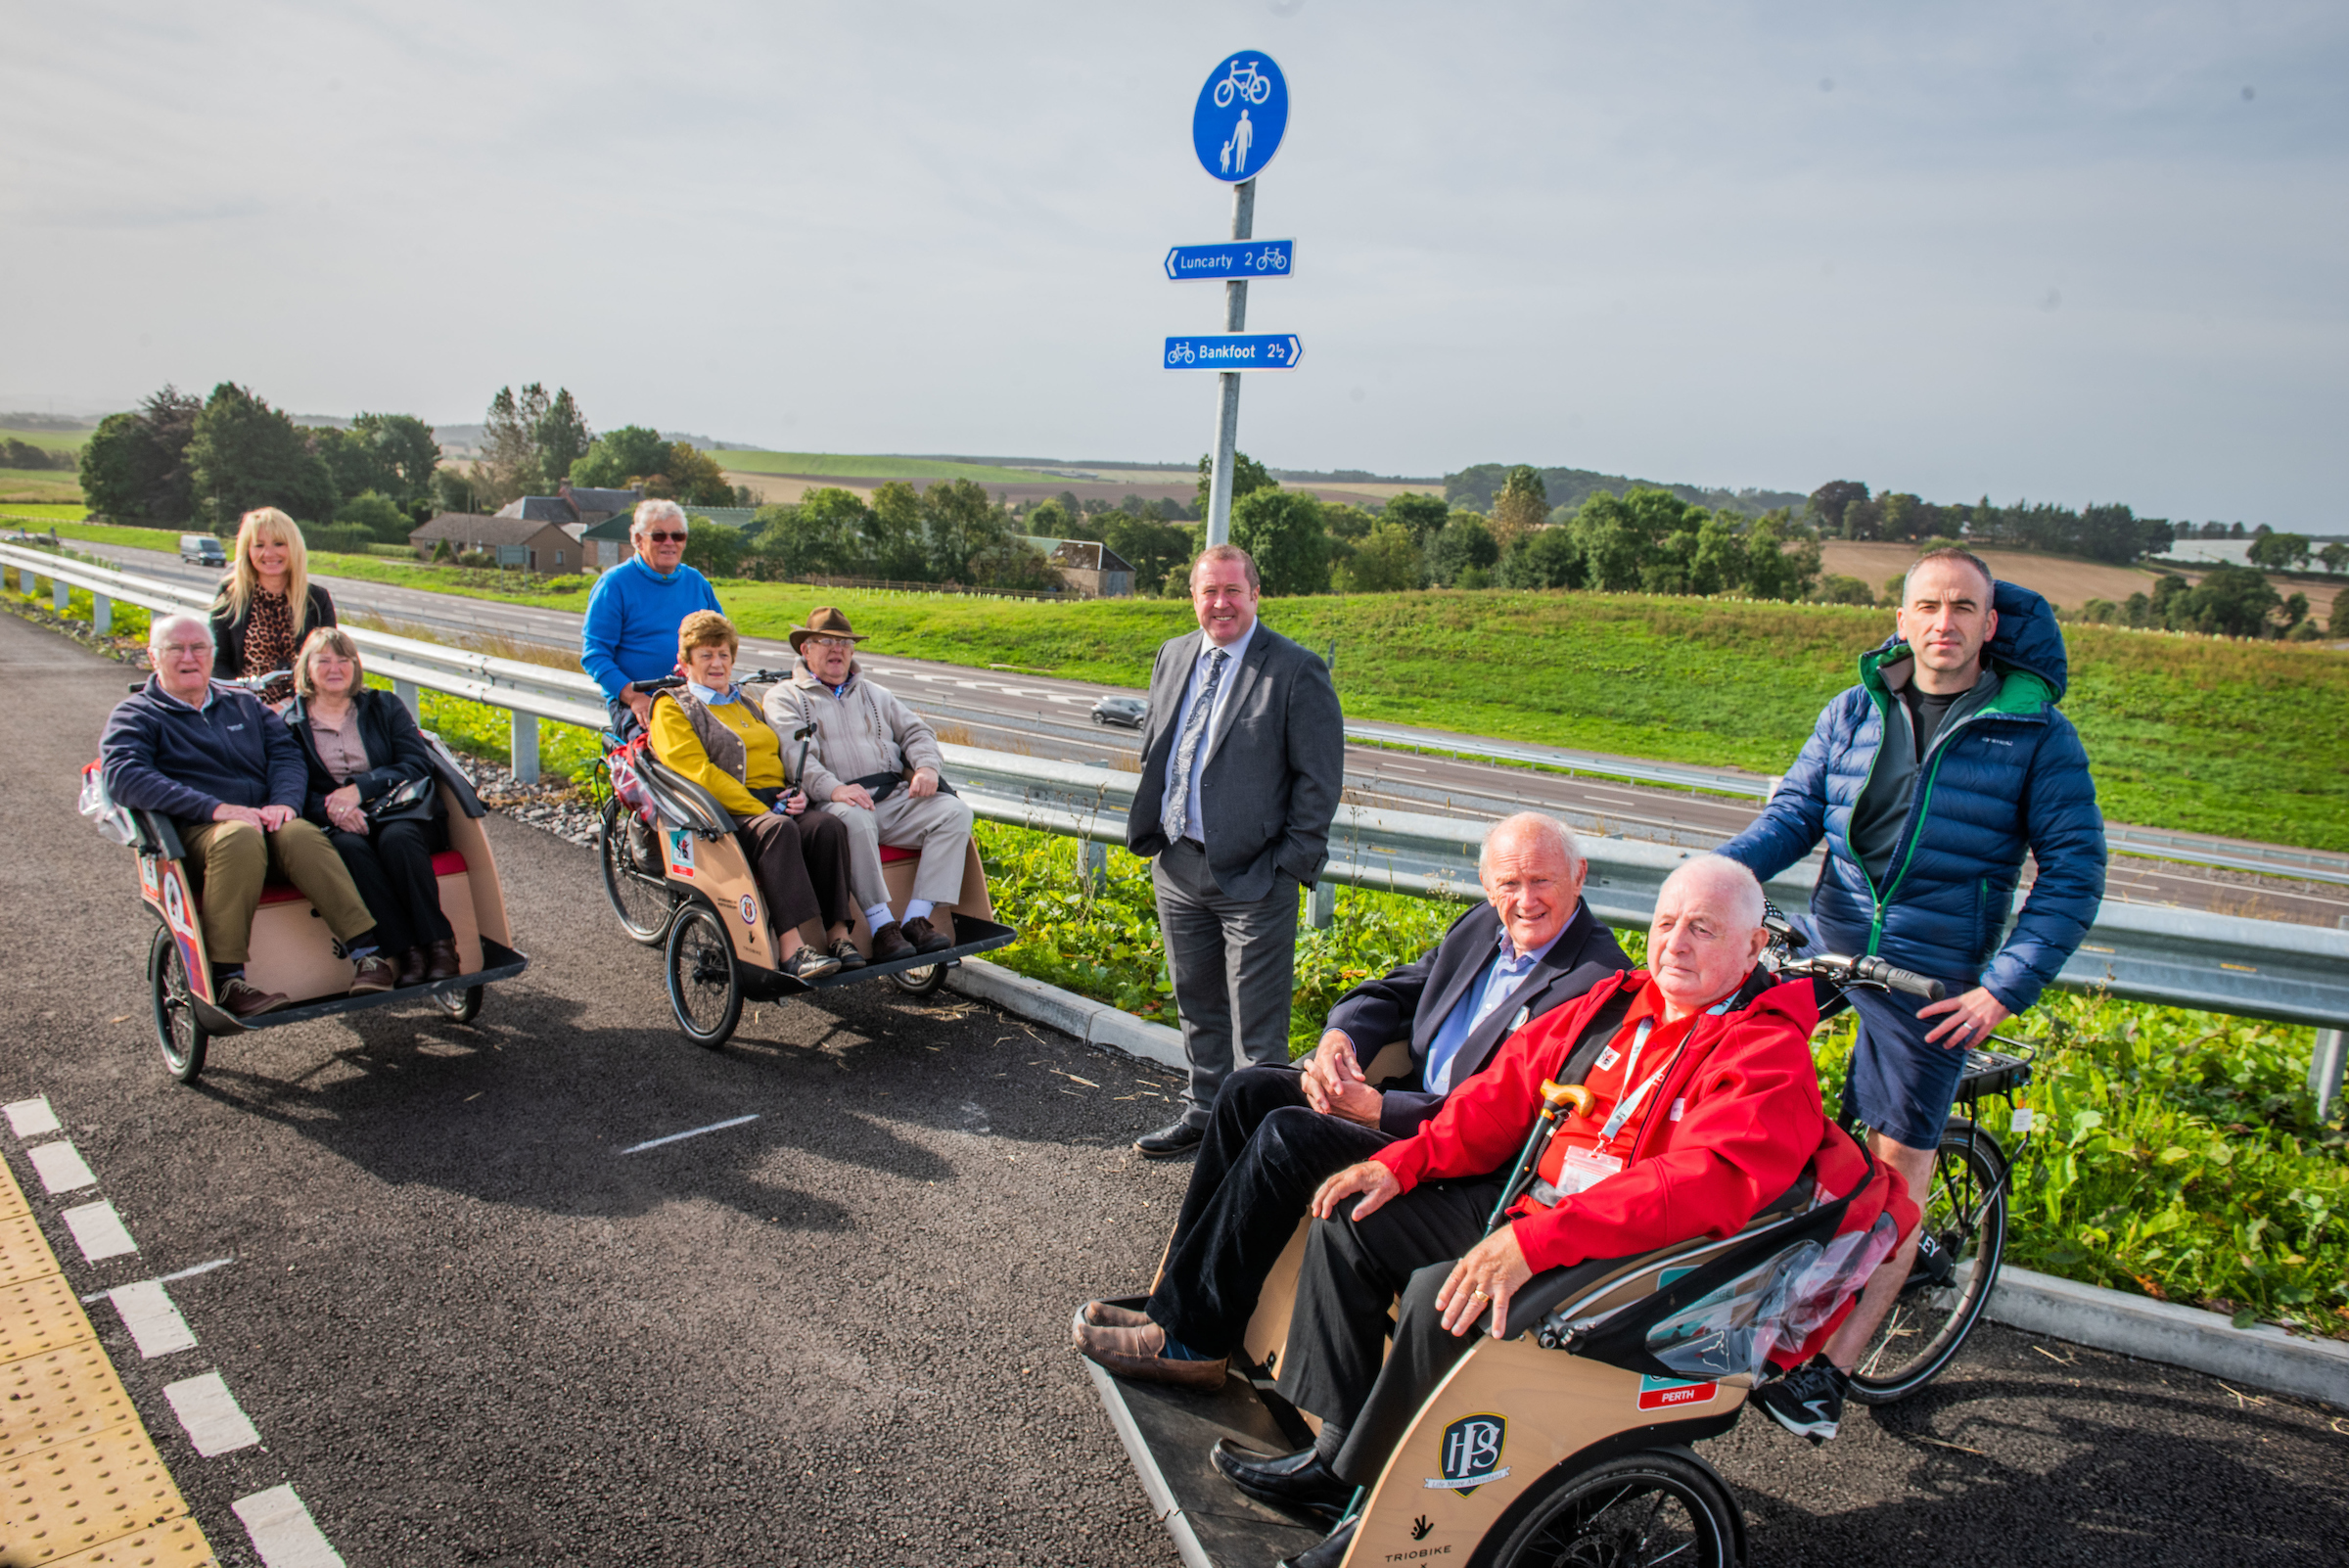 Transport Minister Graeme Dey joined by members of local community organisation, Stanley Development Trust and charity, Cycling Without Age Scotland, as members of the Trust explored some of the cycle paths